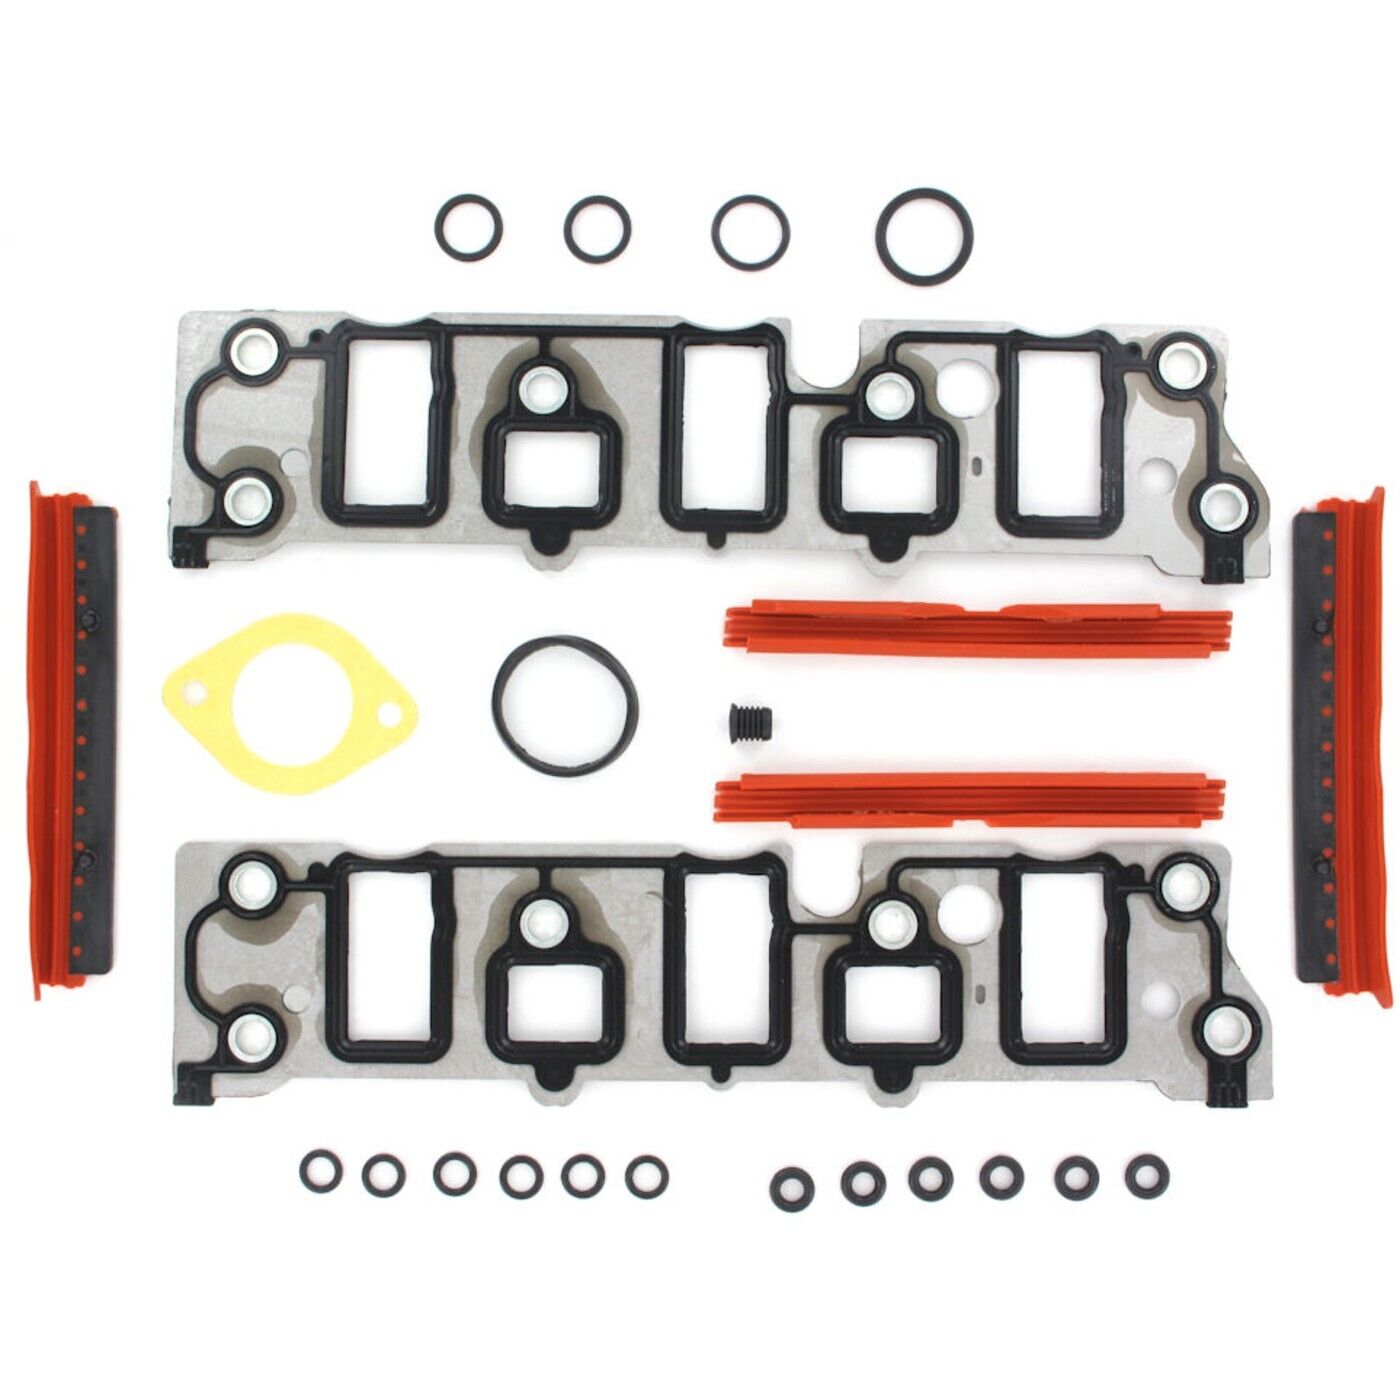 APEX AMS3595P Intake Manifold Gaskets Set for Chevy Olds Le Sabre NINETY EIGHT